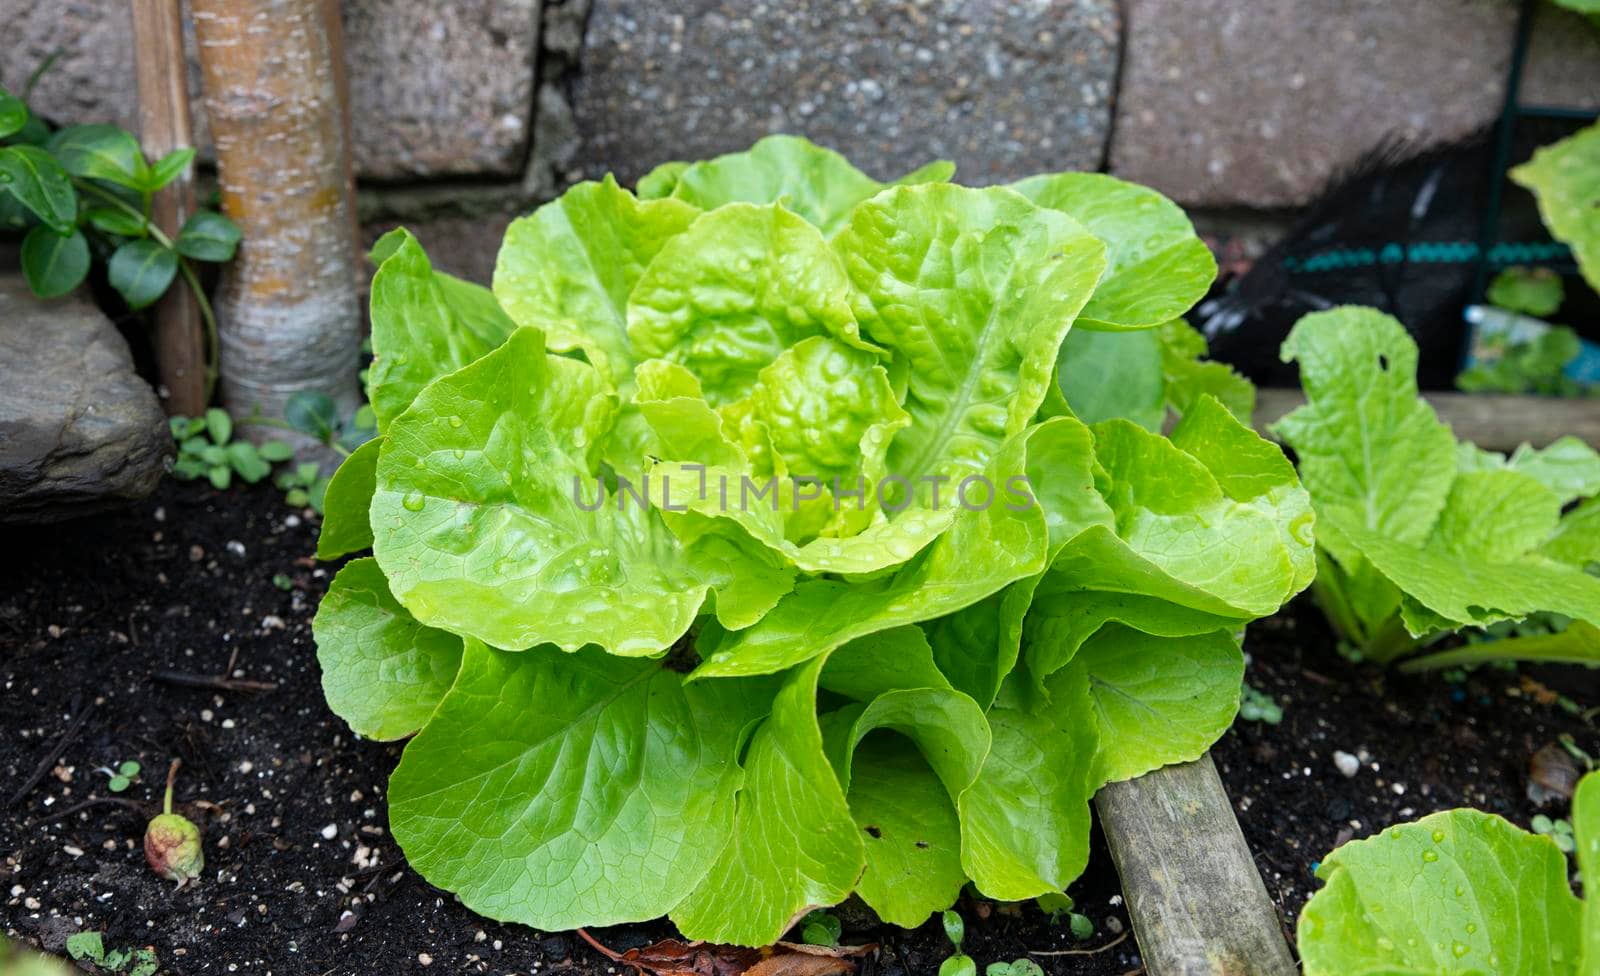 a vegetable garden with fresh lettuce by compuinfoto